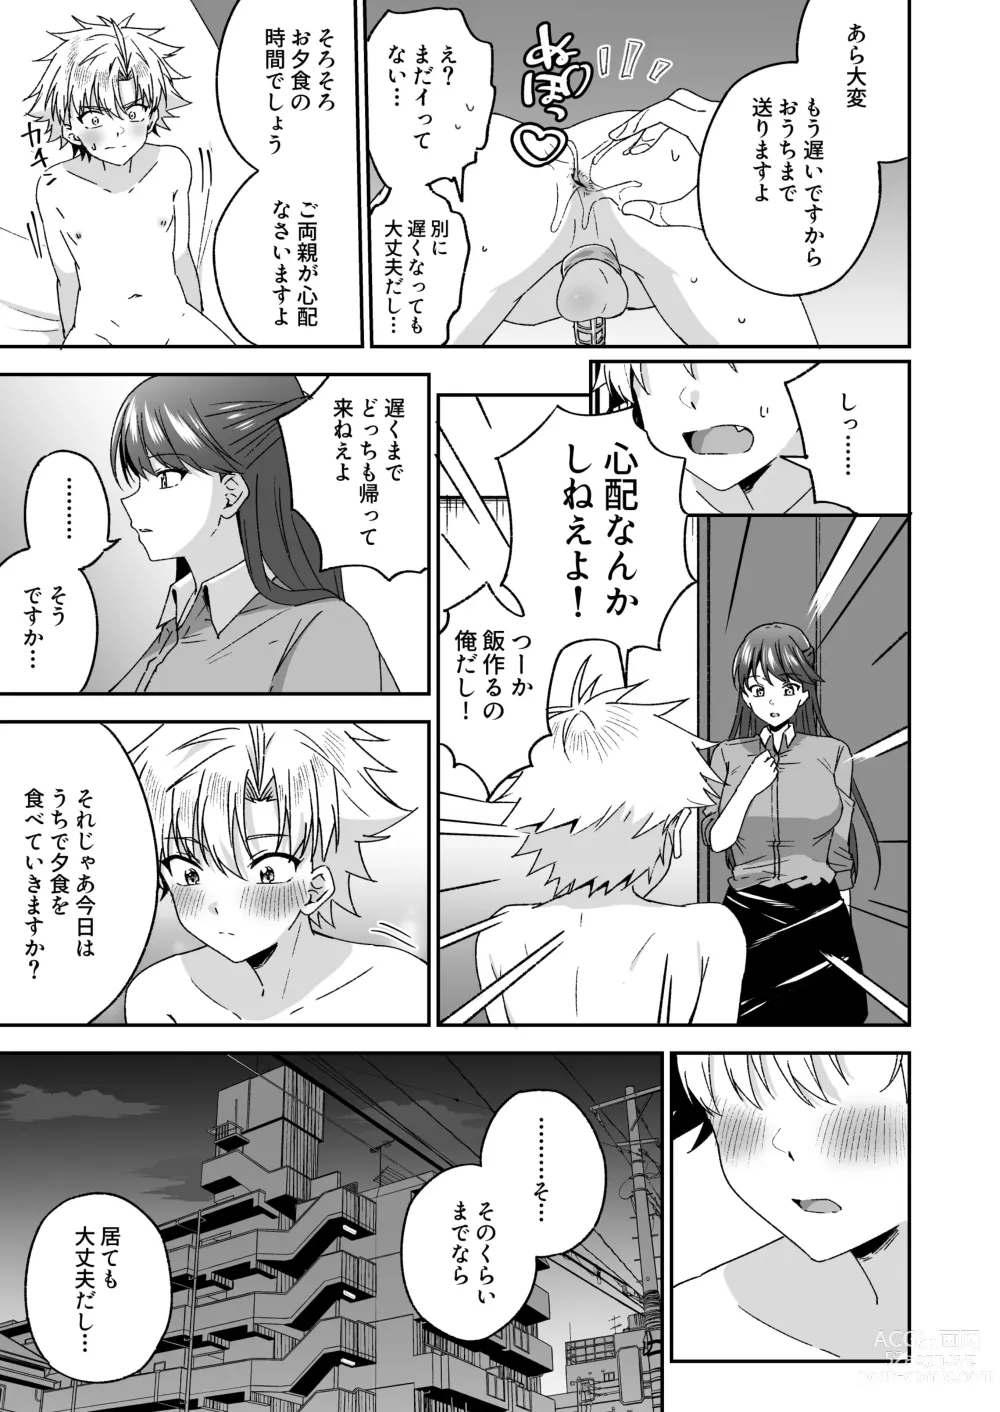 Page 32 of doujinshi A story about a delinquent boy who gets chastity belt ejaculation control reverse anal sex by a female teacher who is a nymphomaniac